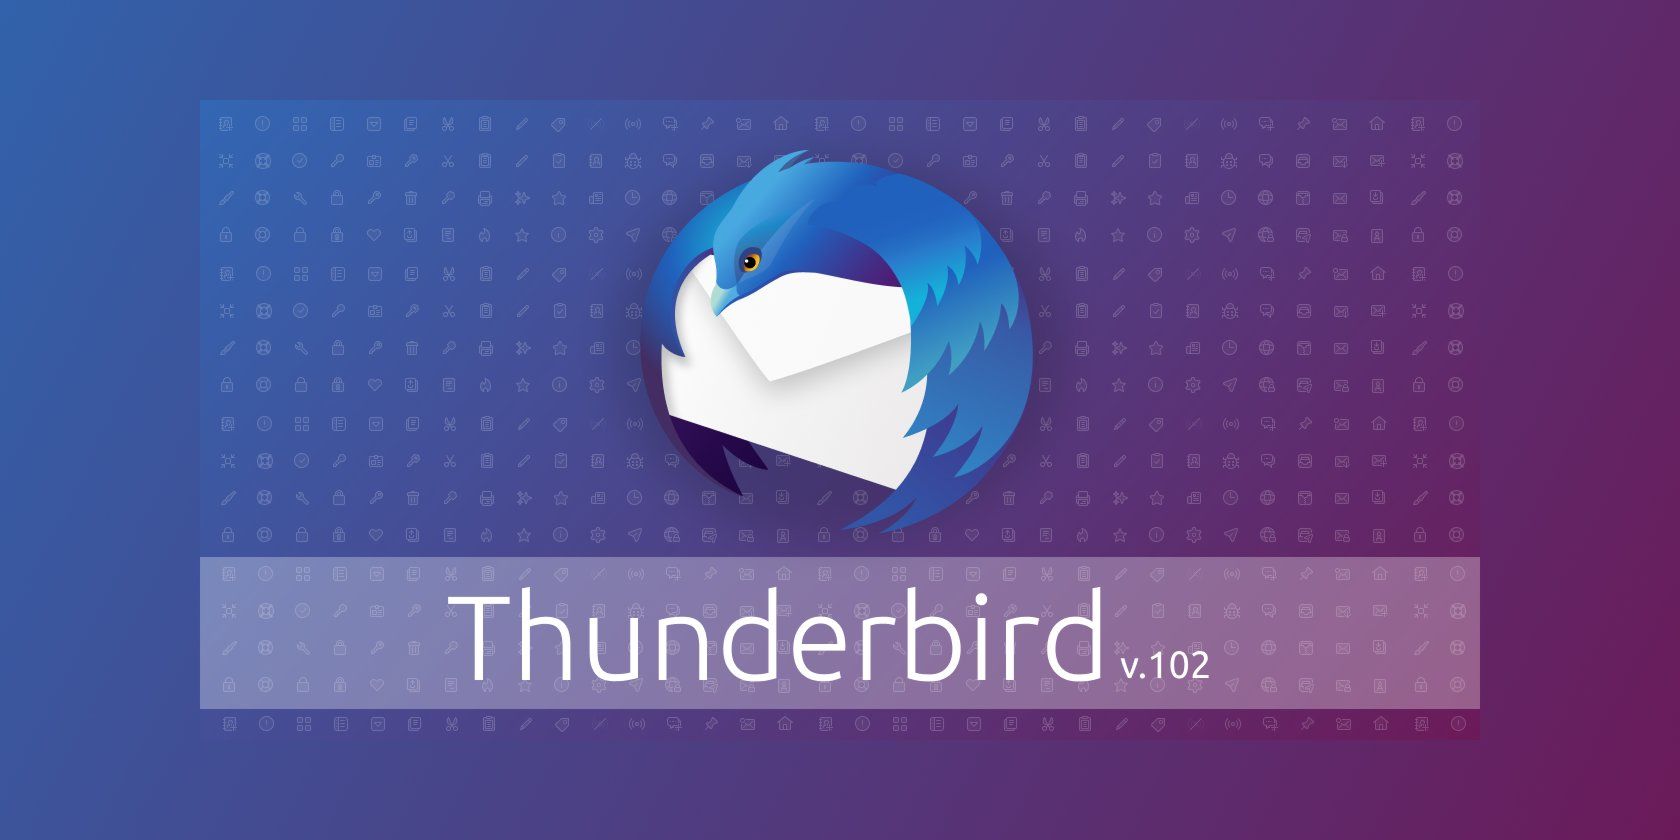 Thunderbird Logo over blue and purple gradient with text 